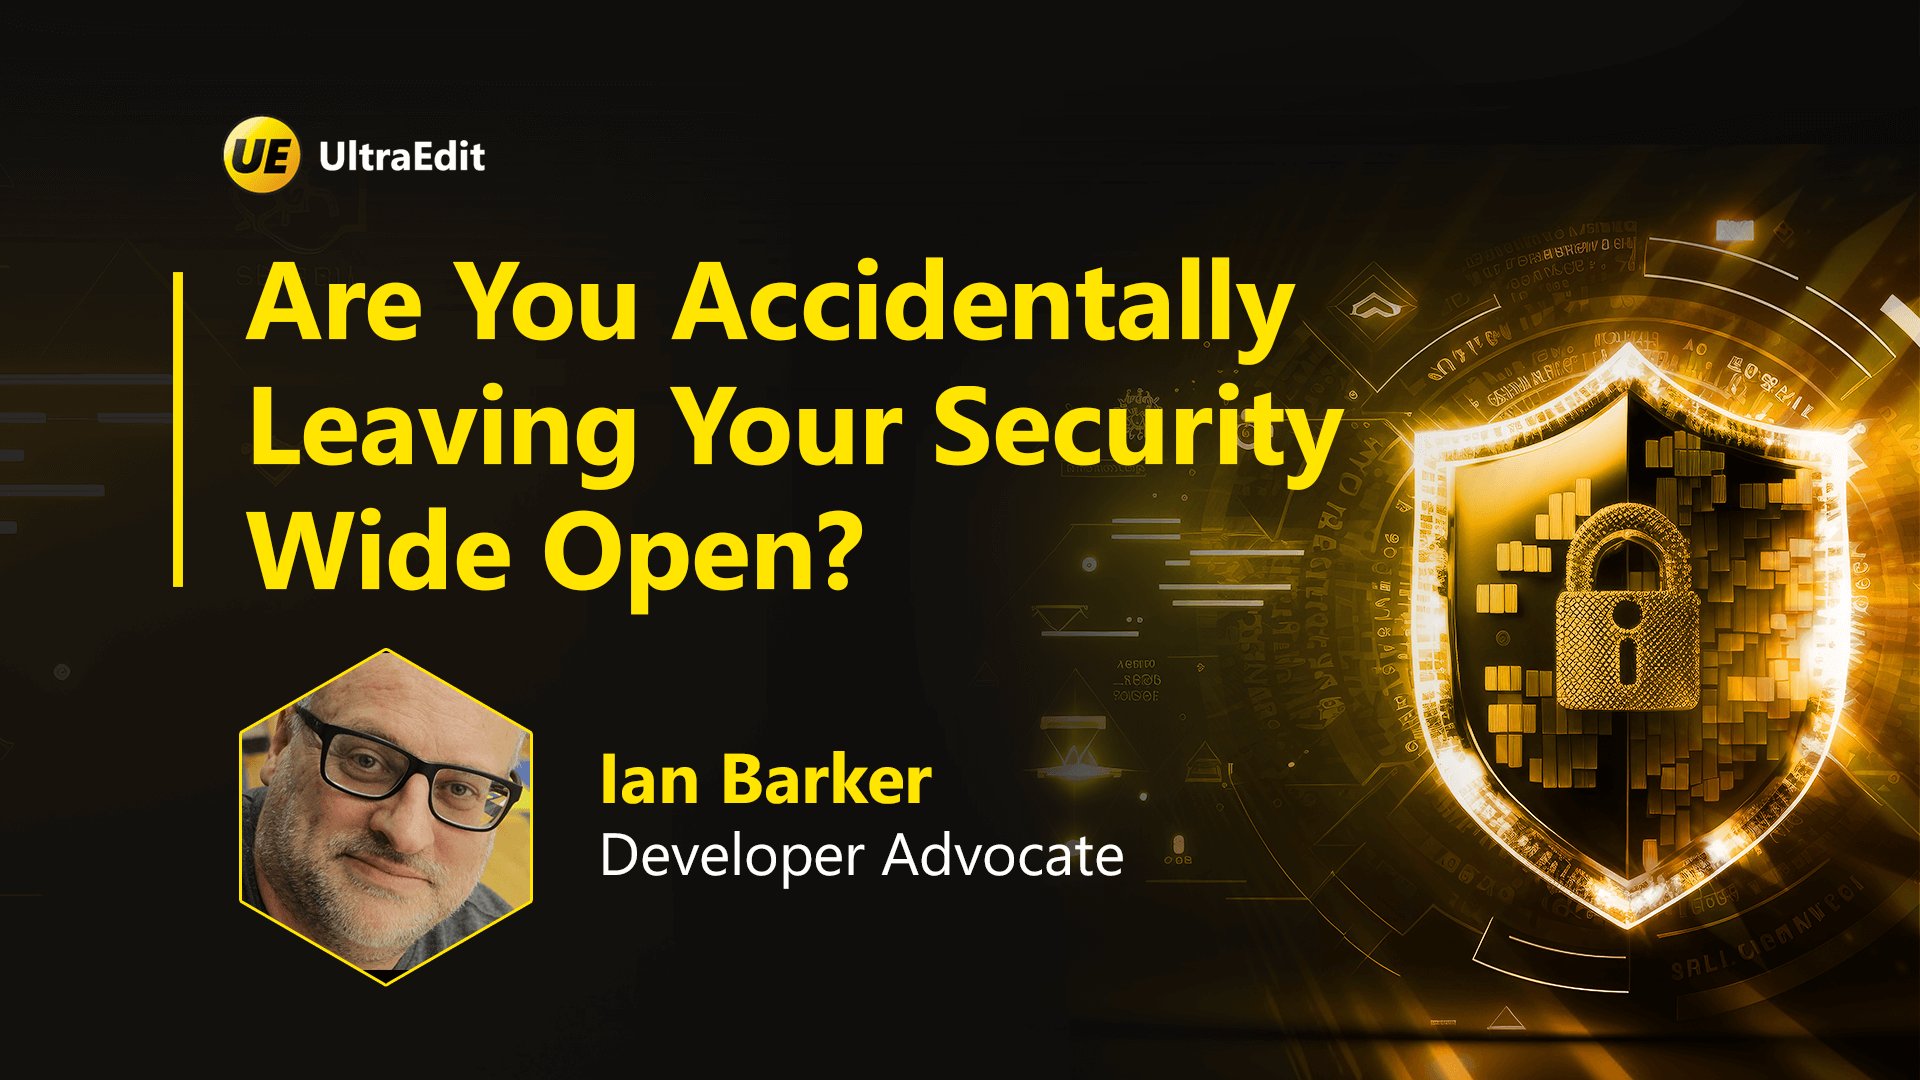 UltraEdit Masterclass: Are you accidentally leaving your security wide open? [Webinar Recap]